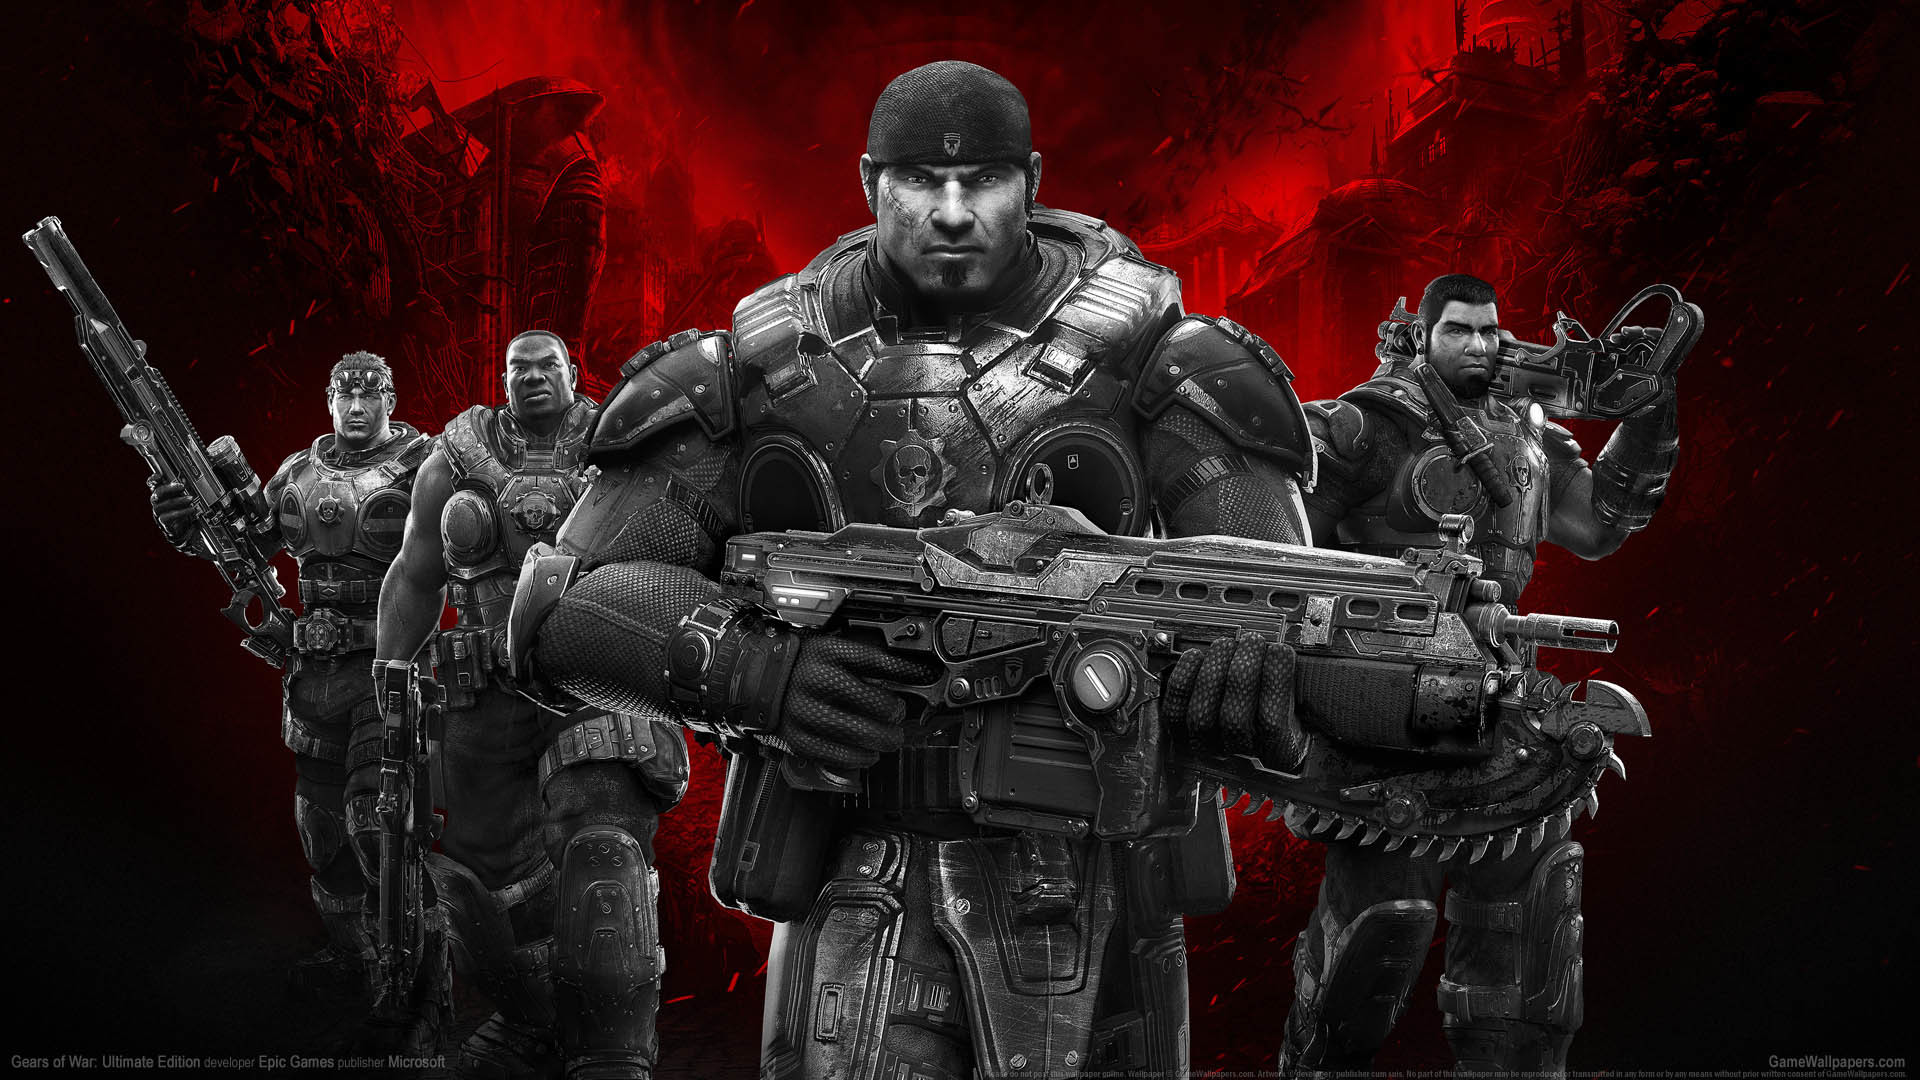 1920x1080 ... Gears of War: Ultimate Edition wallpaper or background 01